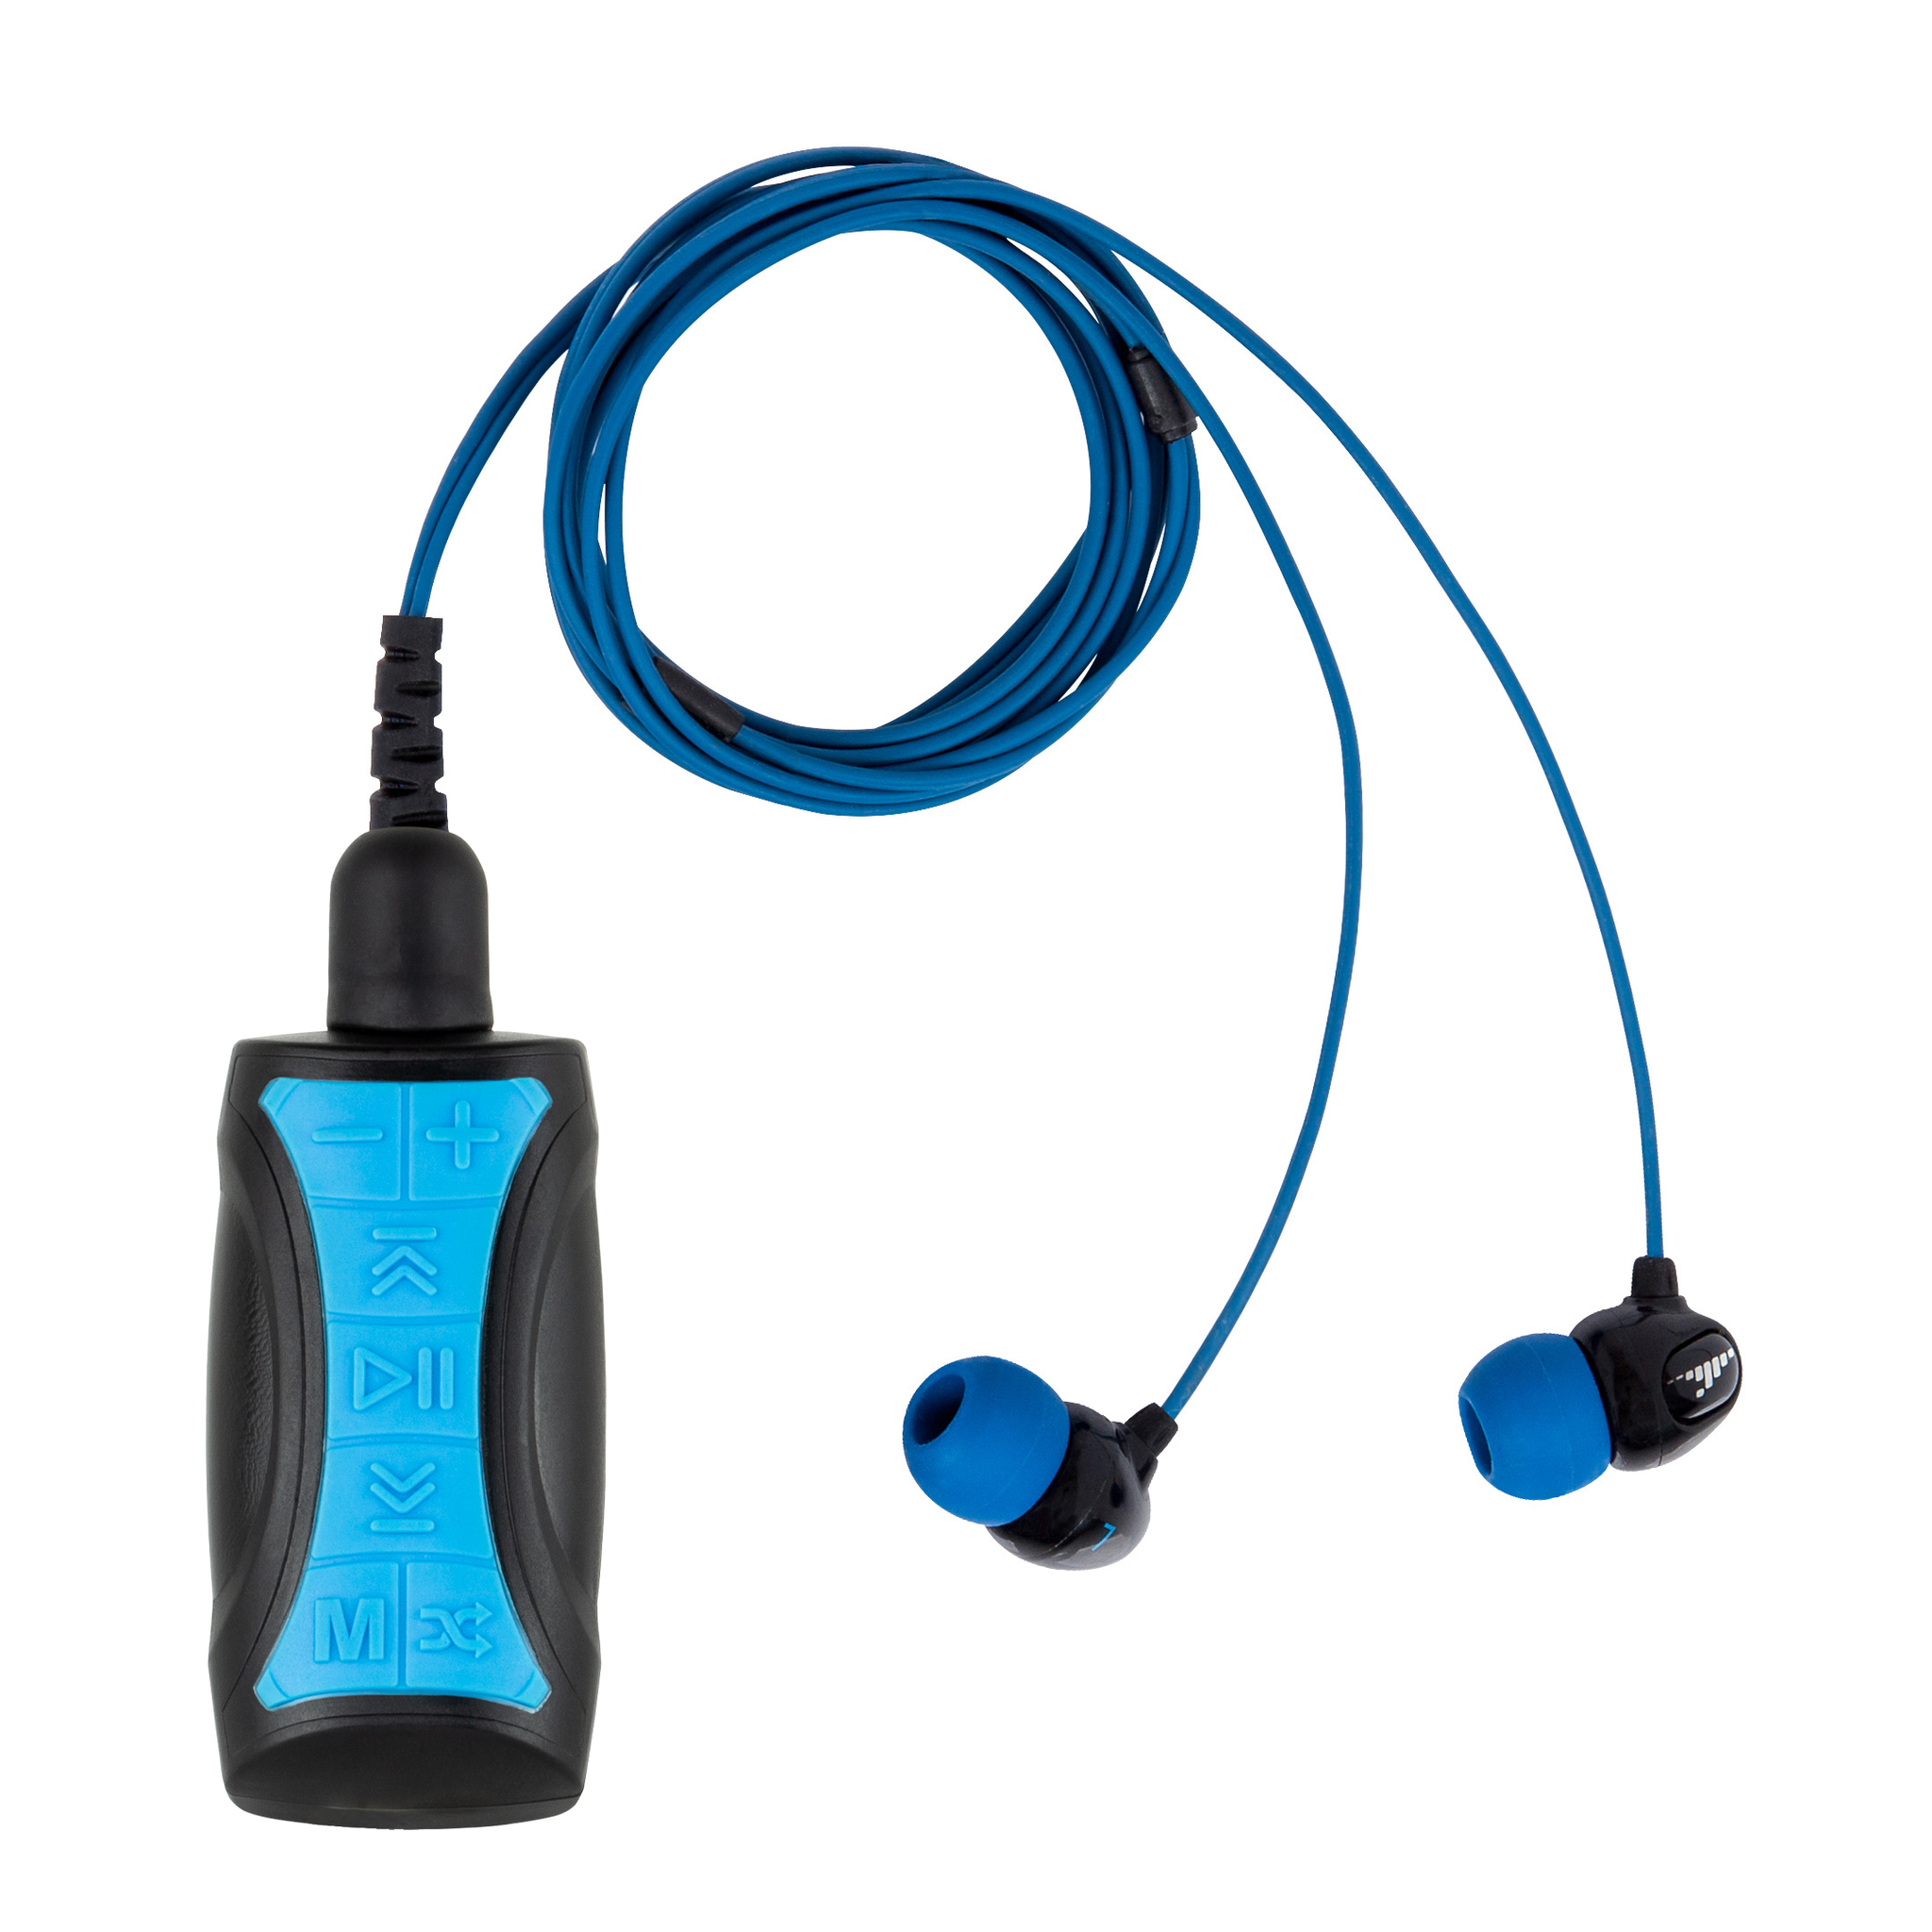 Waterproof MP3 player with Bone Conduction Headphones for Swimming